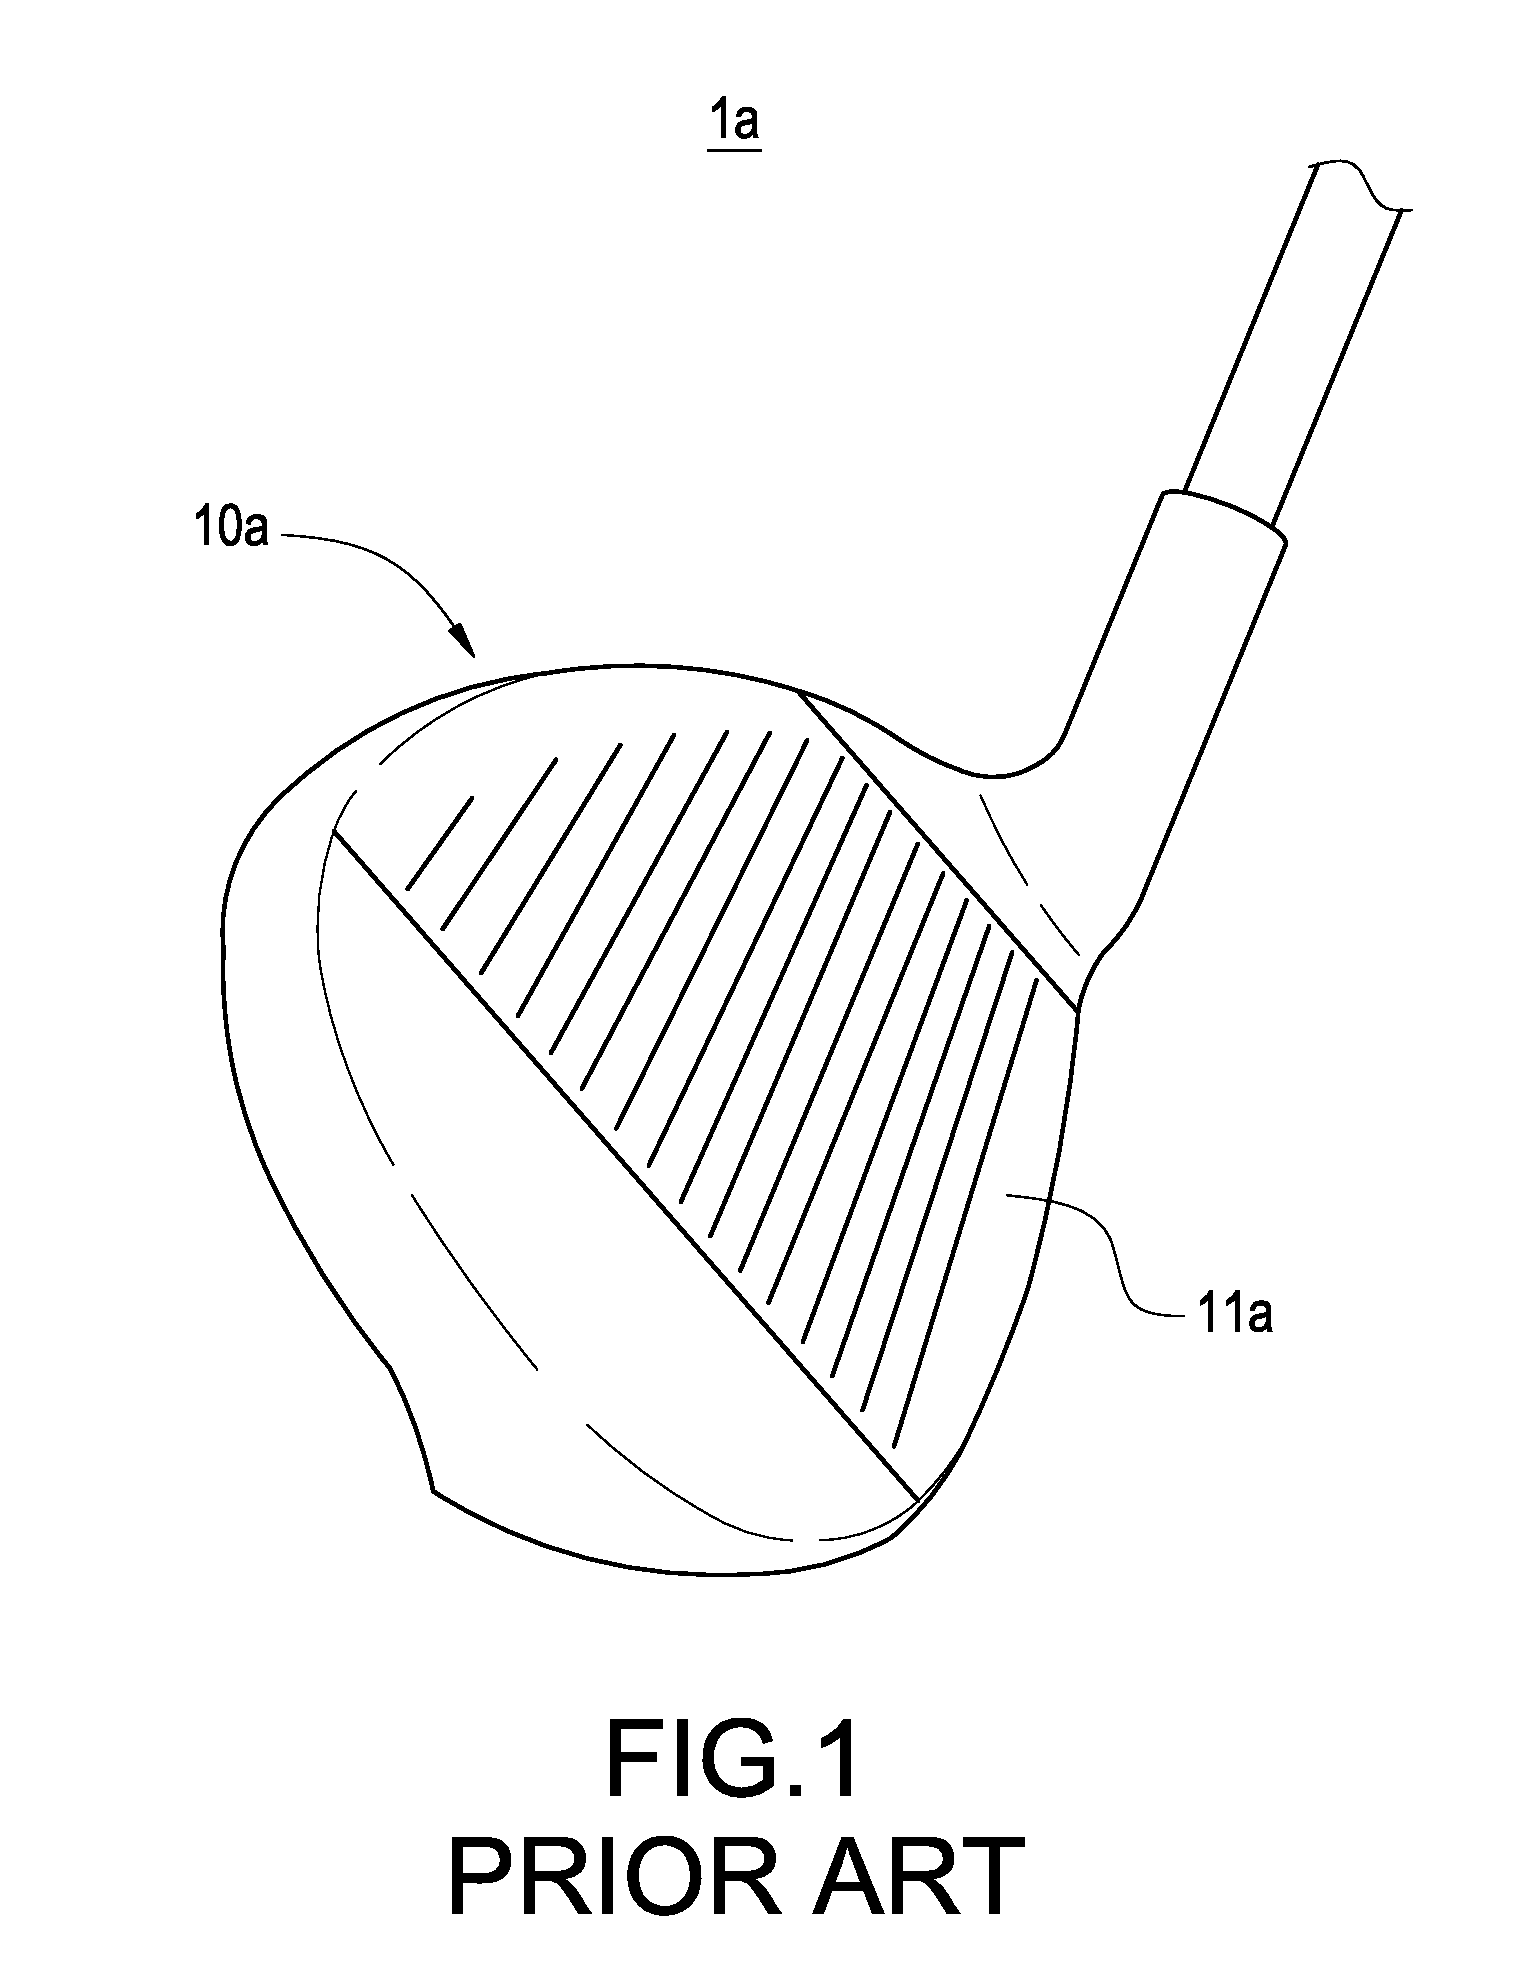 Sand wedge and club head thereof